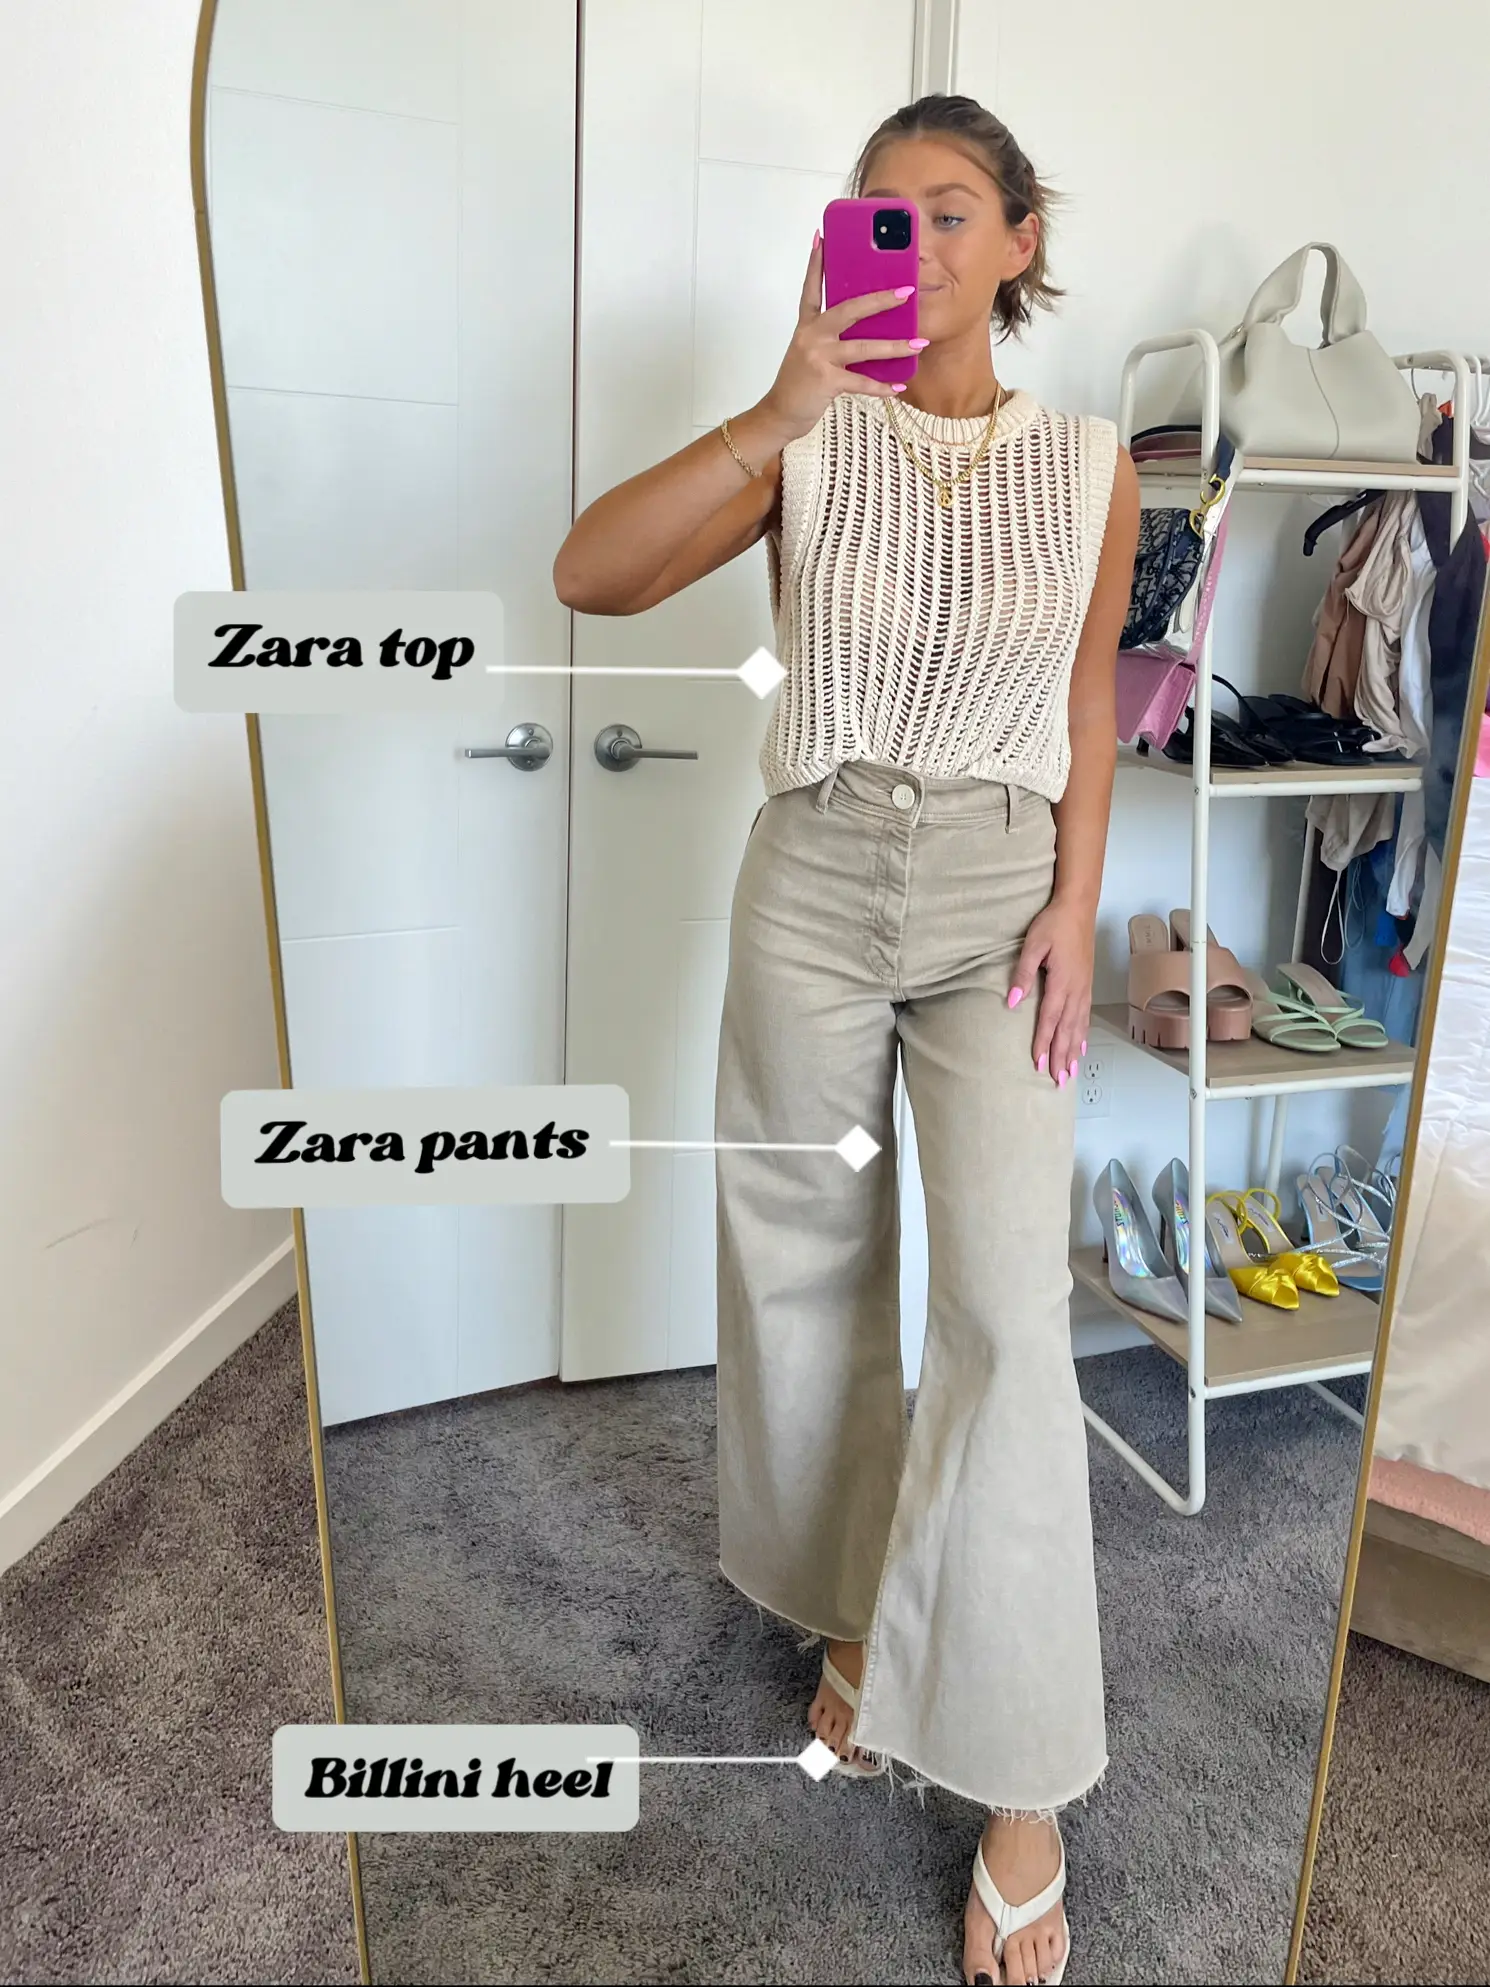 MUST HAVE @zara high waisted trousers!! These colors are perfect for the  spring and upcoming summer. I have them in almost every color a